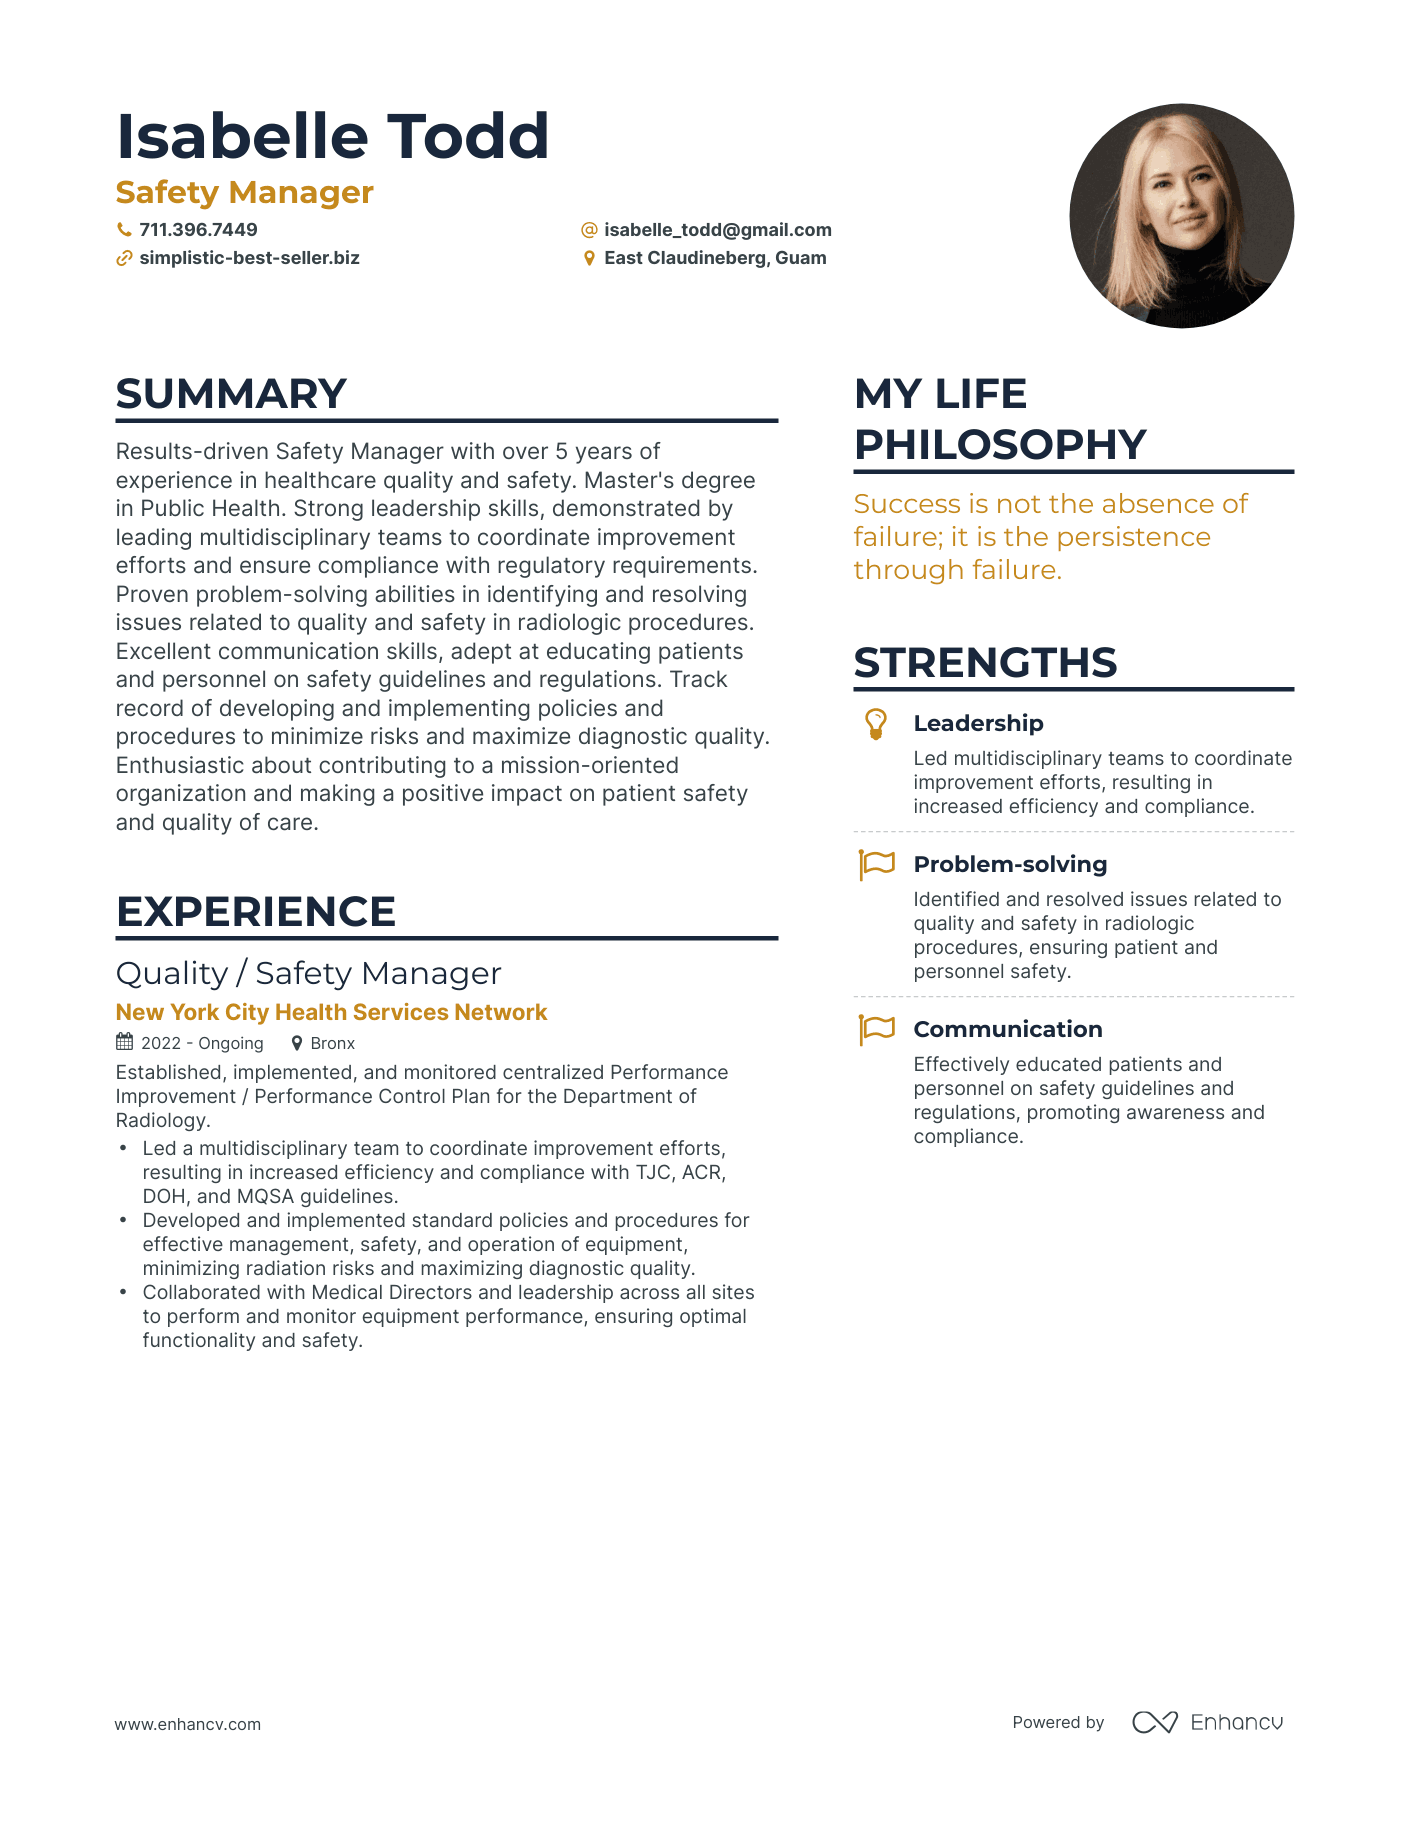 Safety Manager resume example